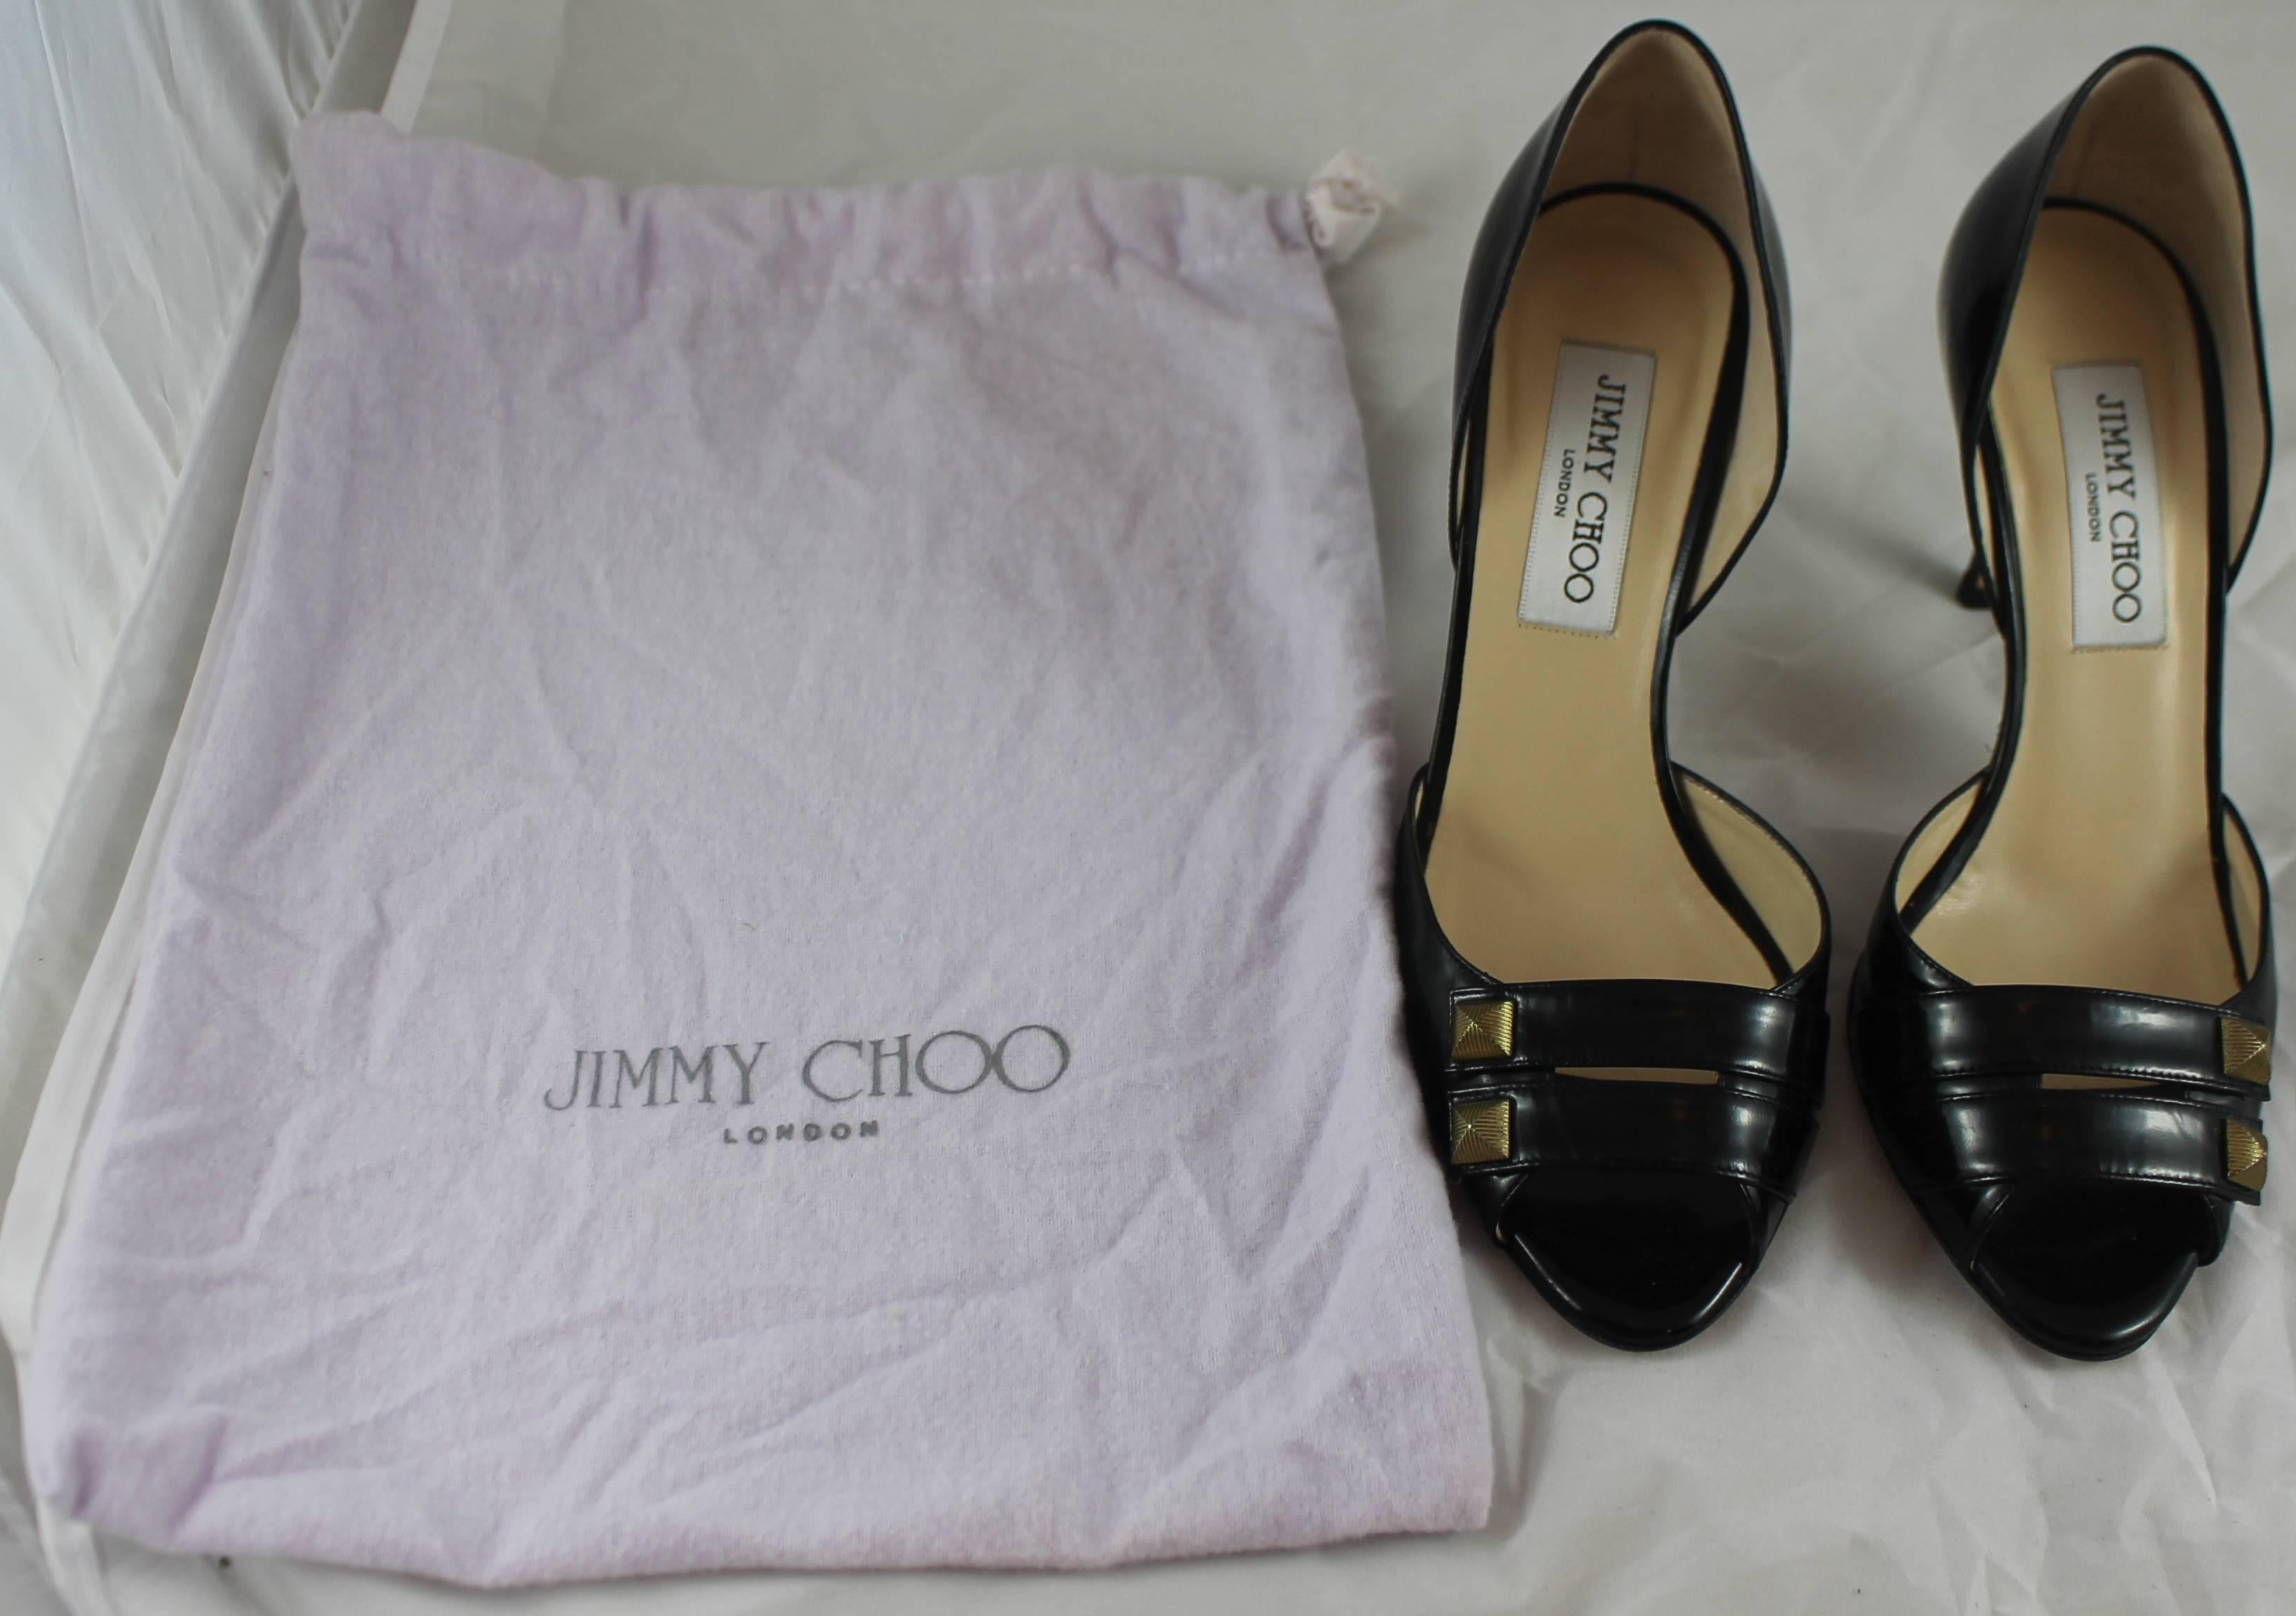 Jimmy Choo Black Leather D'Orsay Heels with Double Straps and Gold Studs - 36.5 4